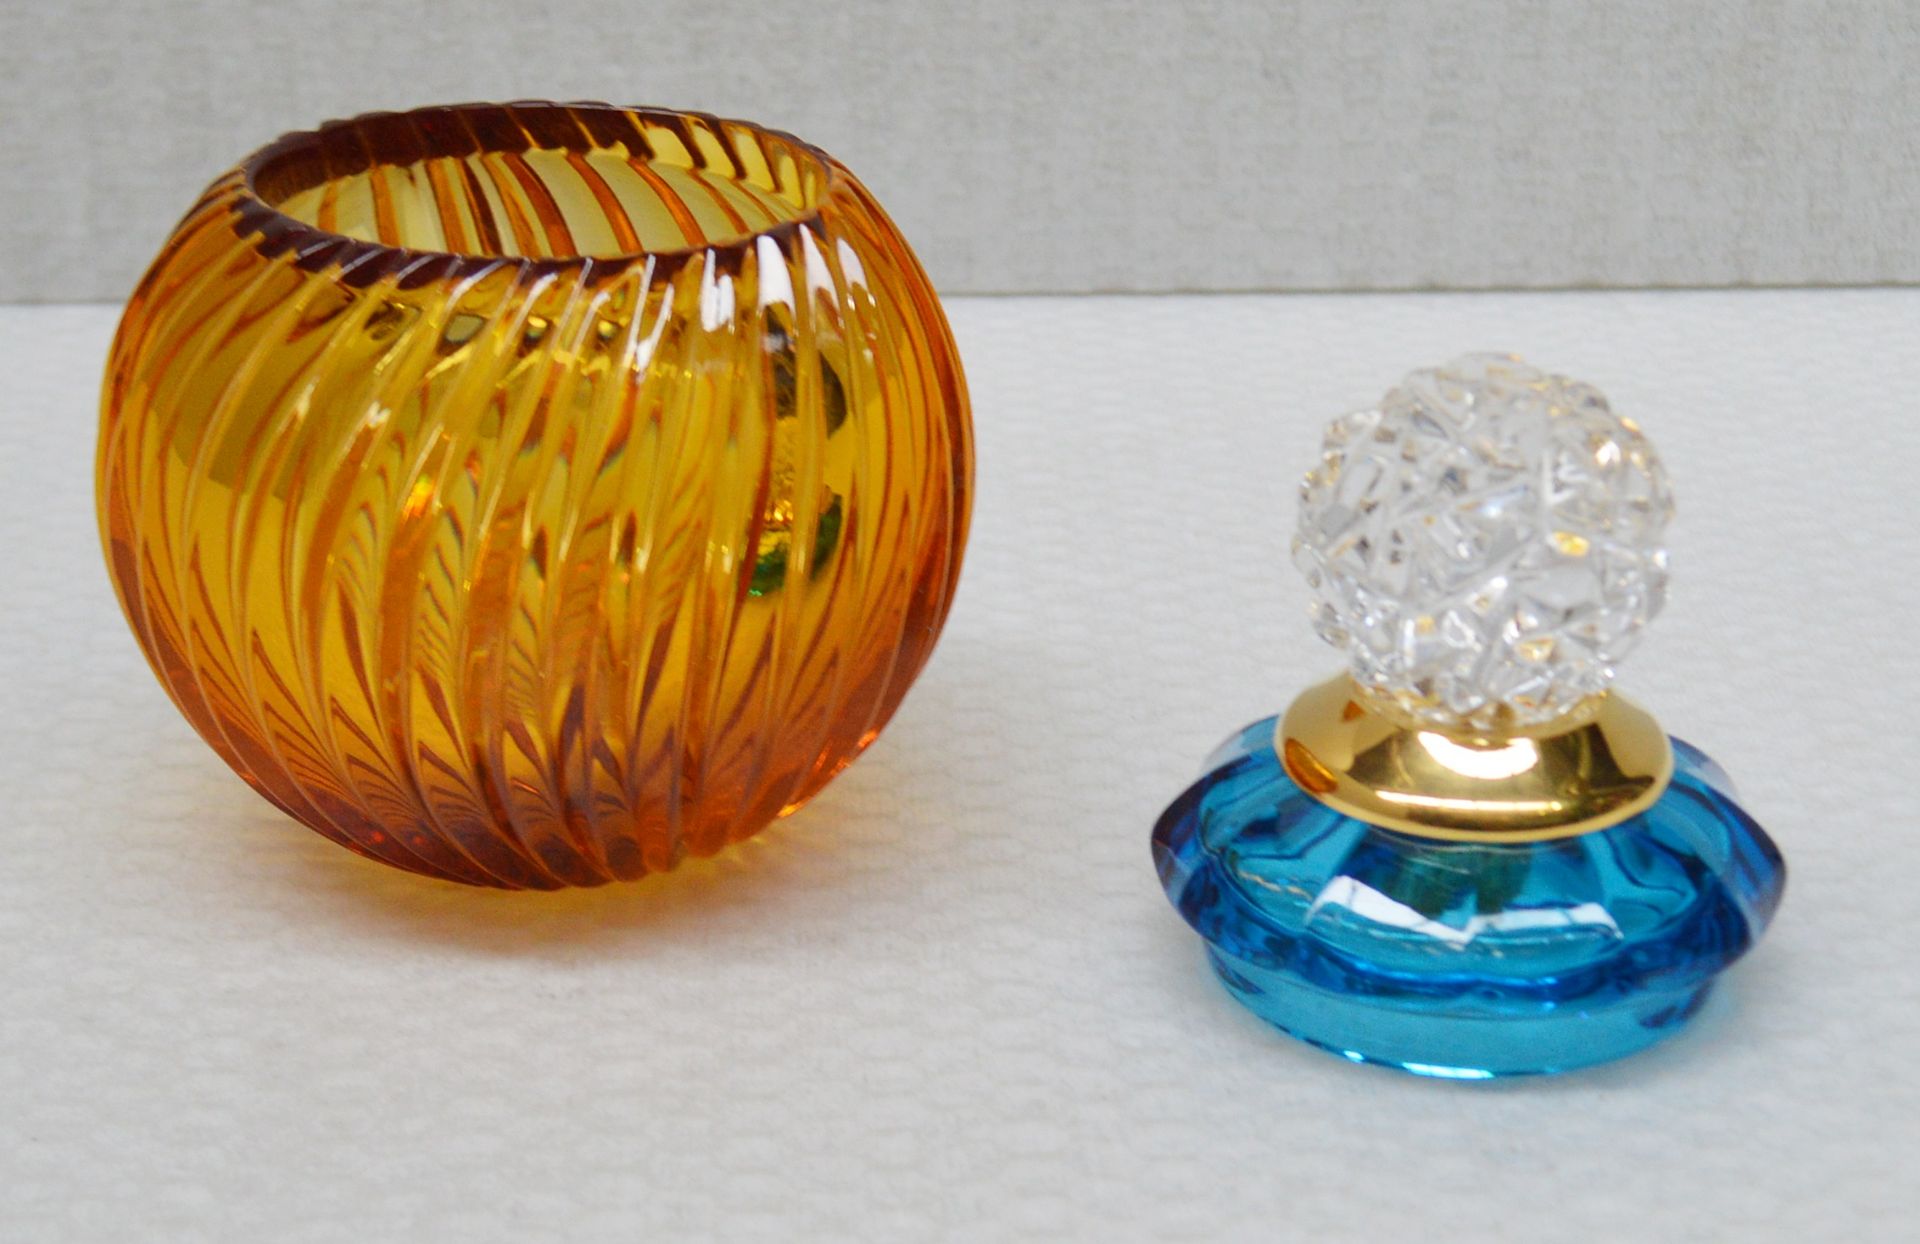 1 x BALDI 'Home Jewels' Italian Hand-crafted Artisan Small Coccinella Jar In Blue And Orange Crystal - Image 3 of 3